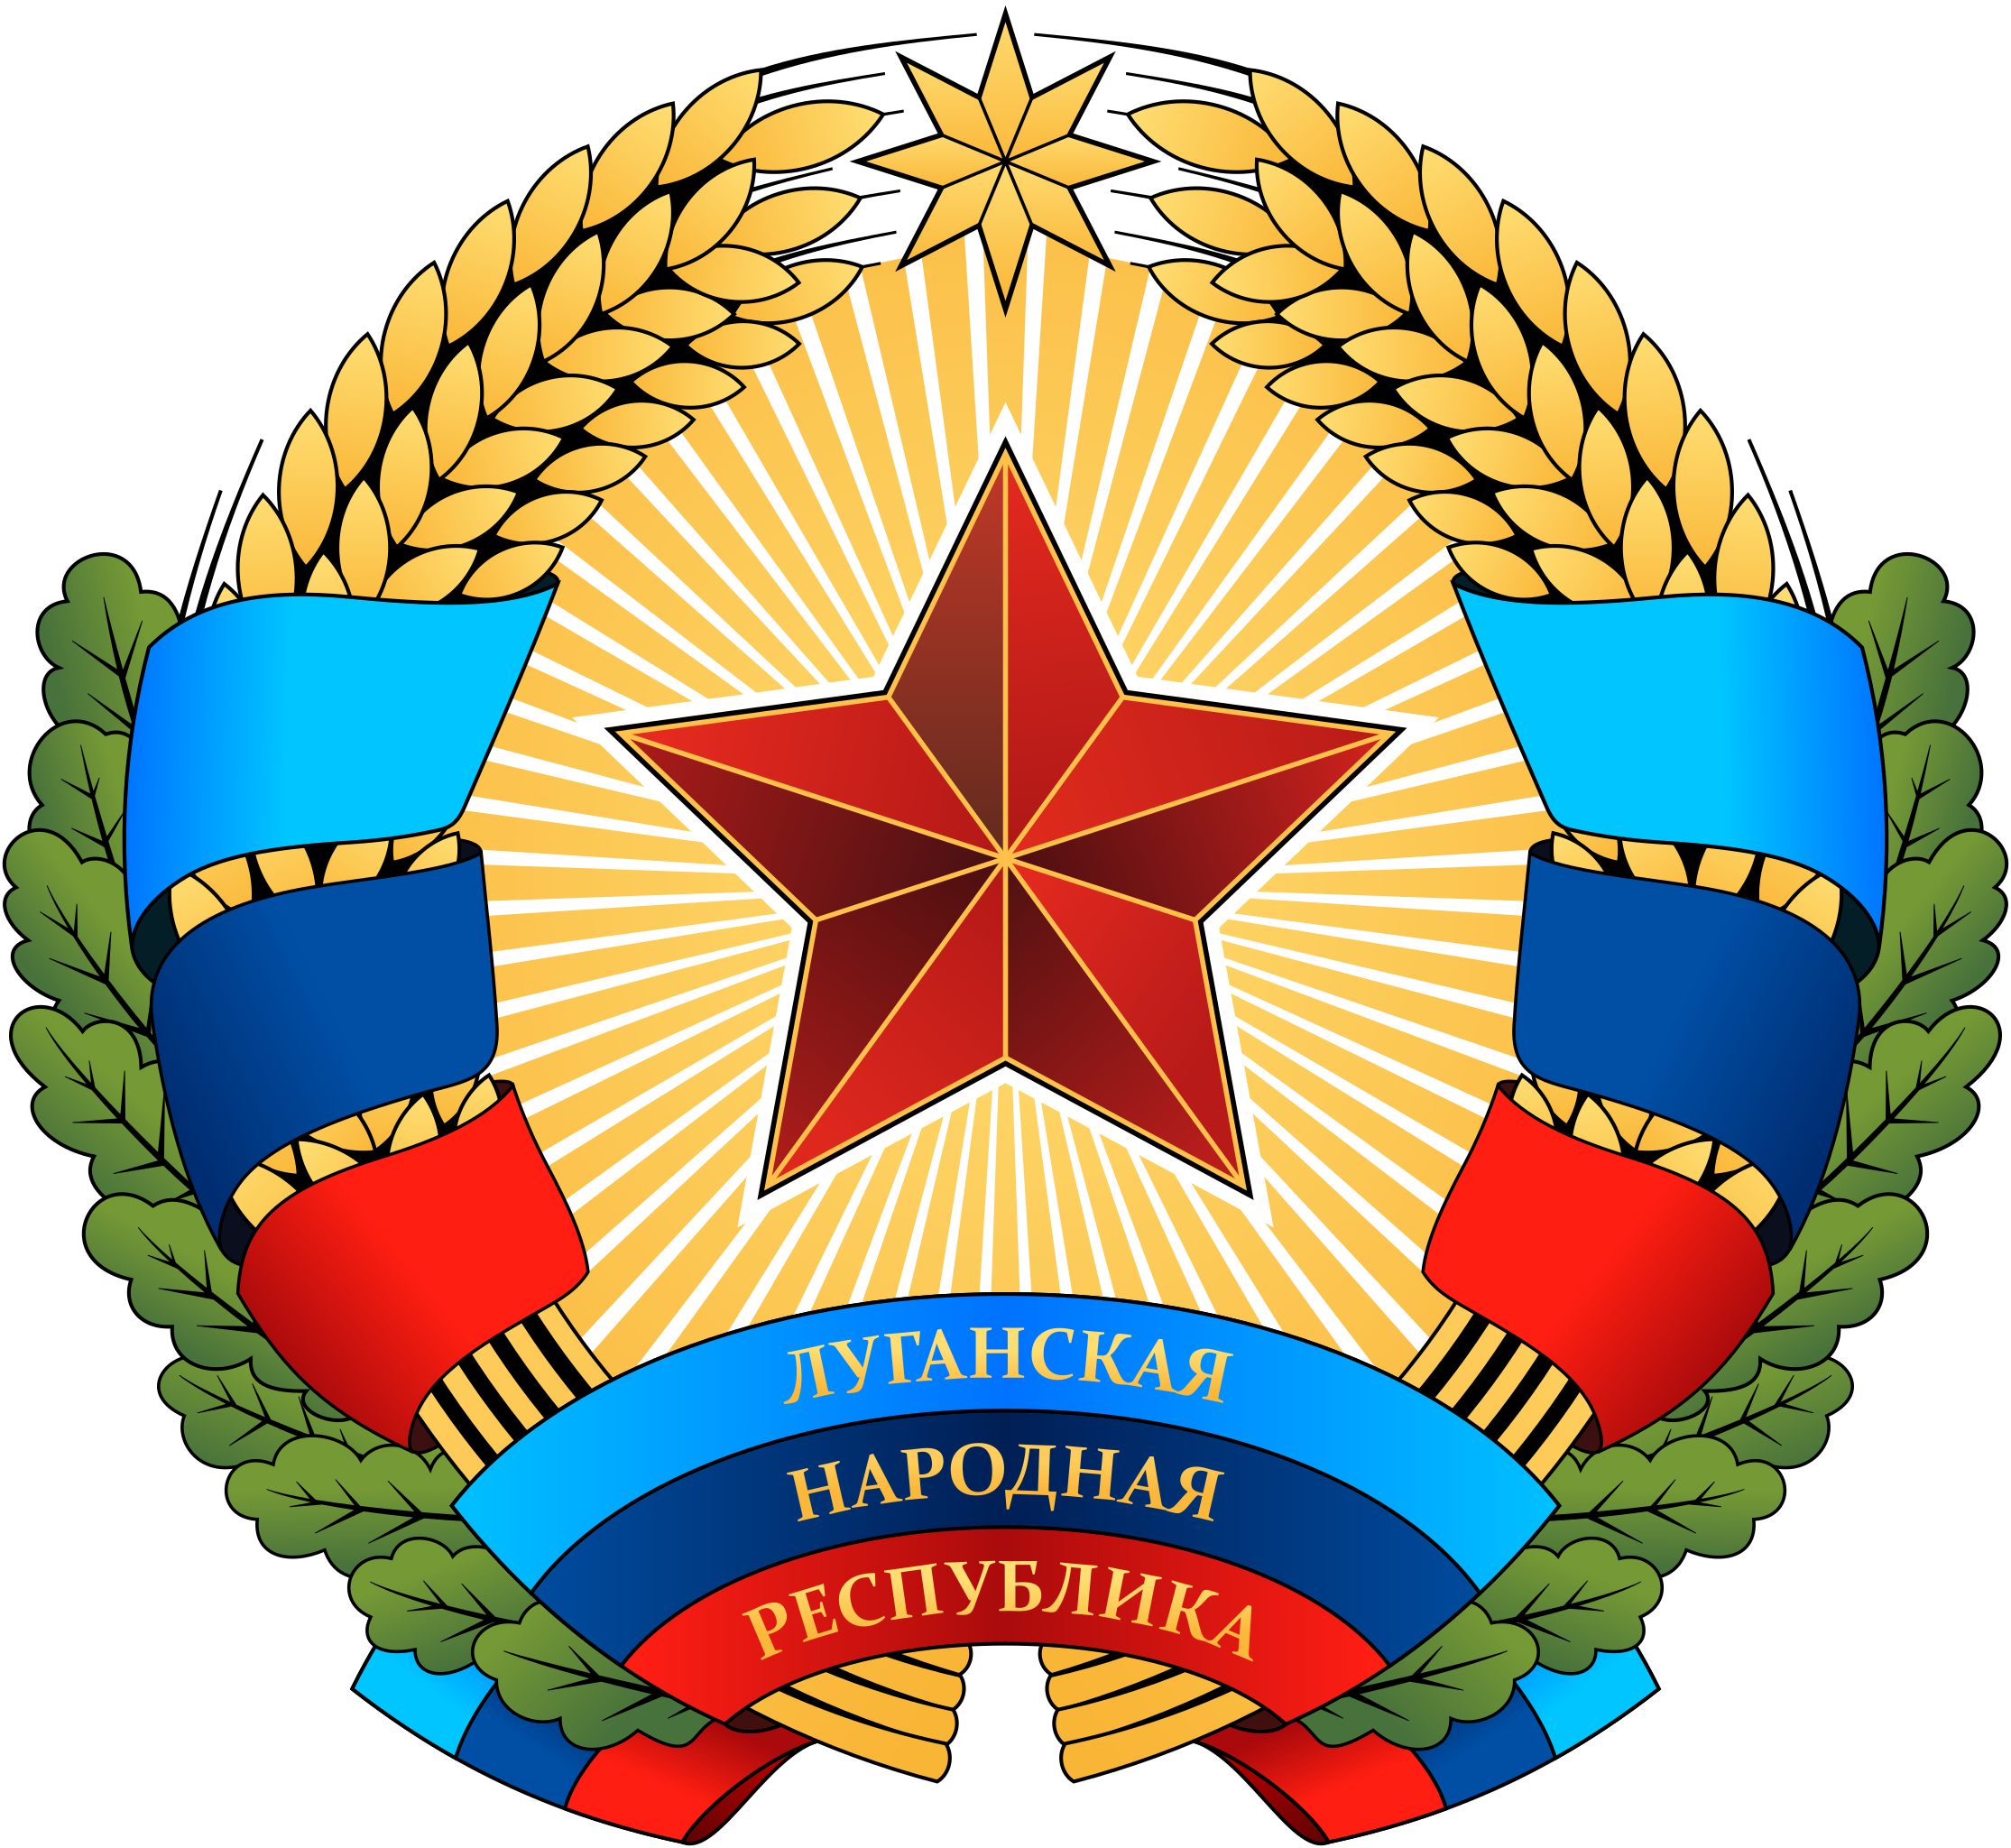 Coat of arms of Lugansk People's Republic